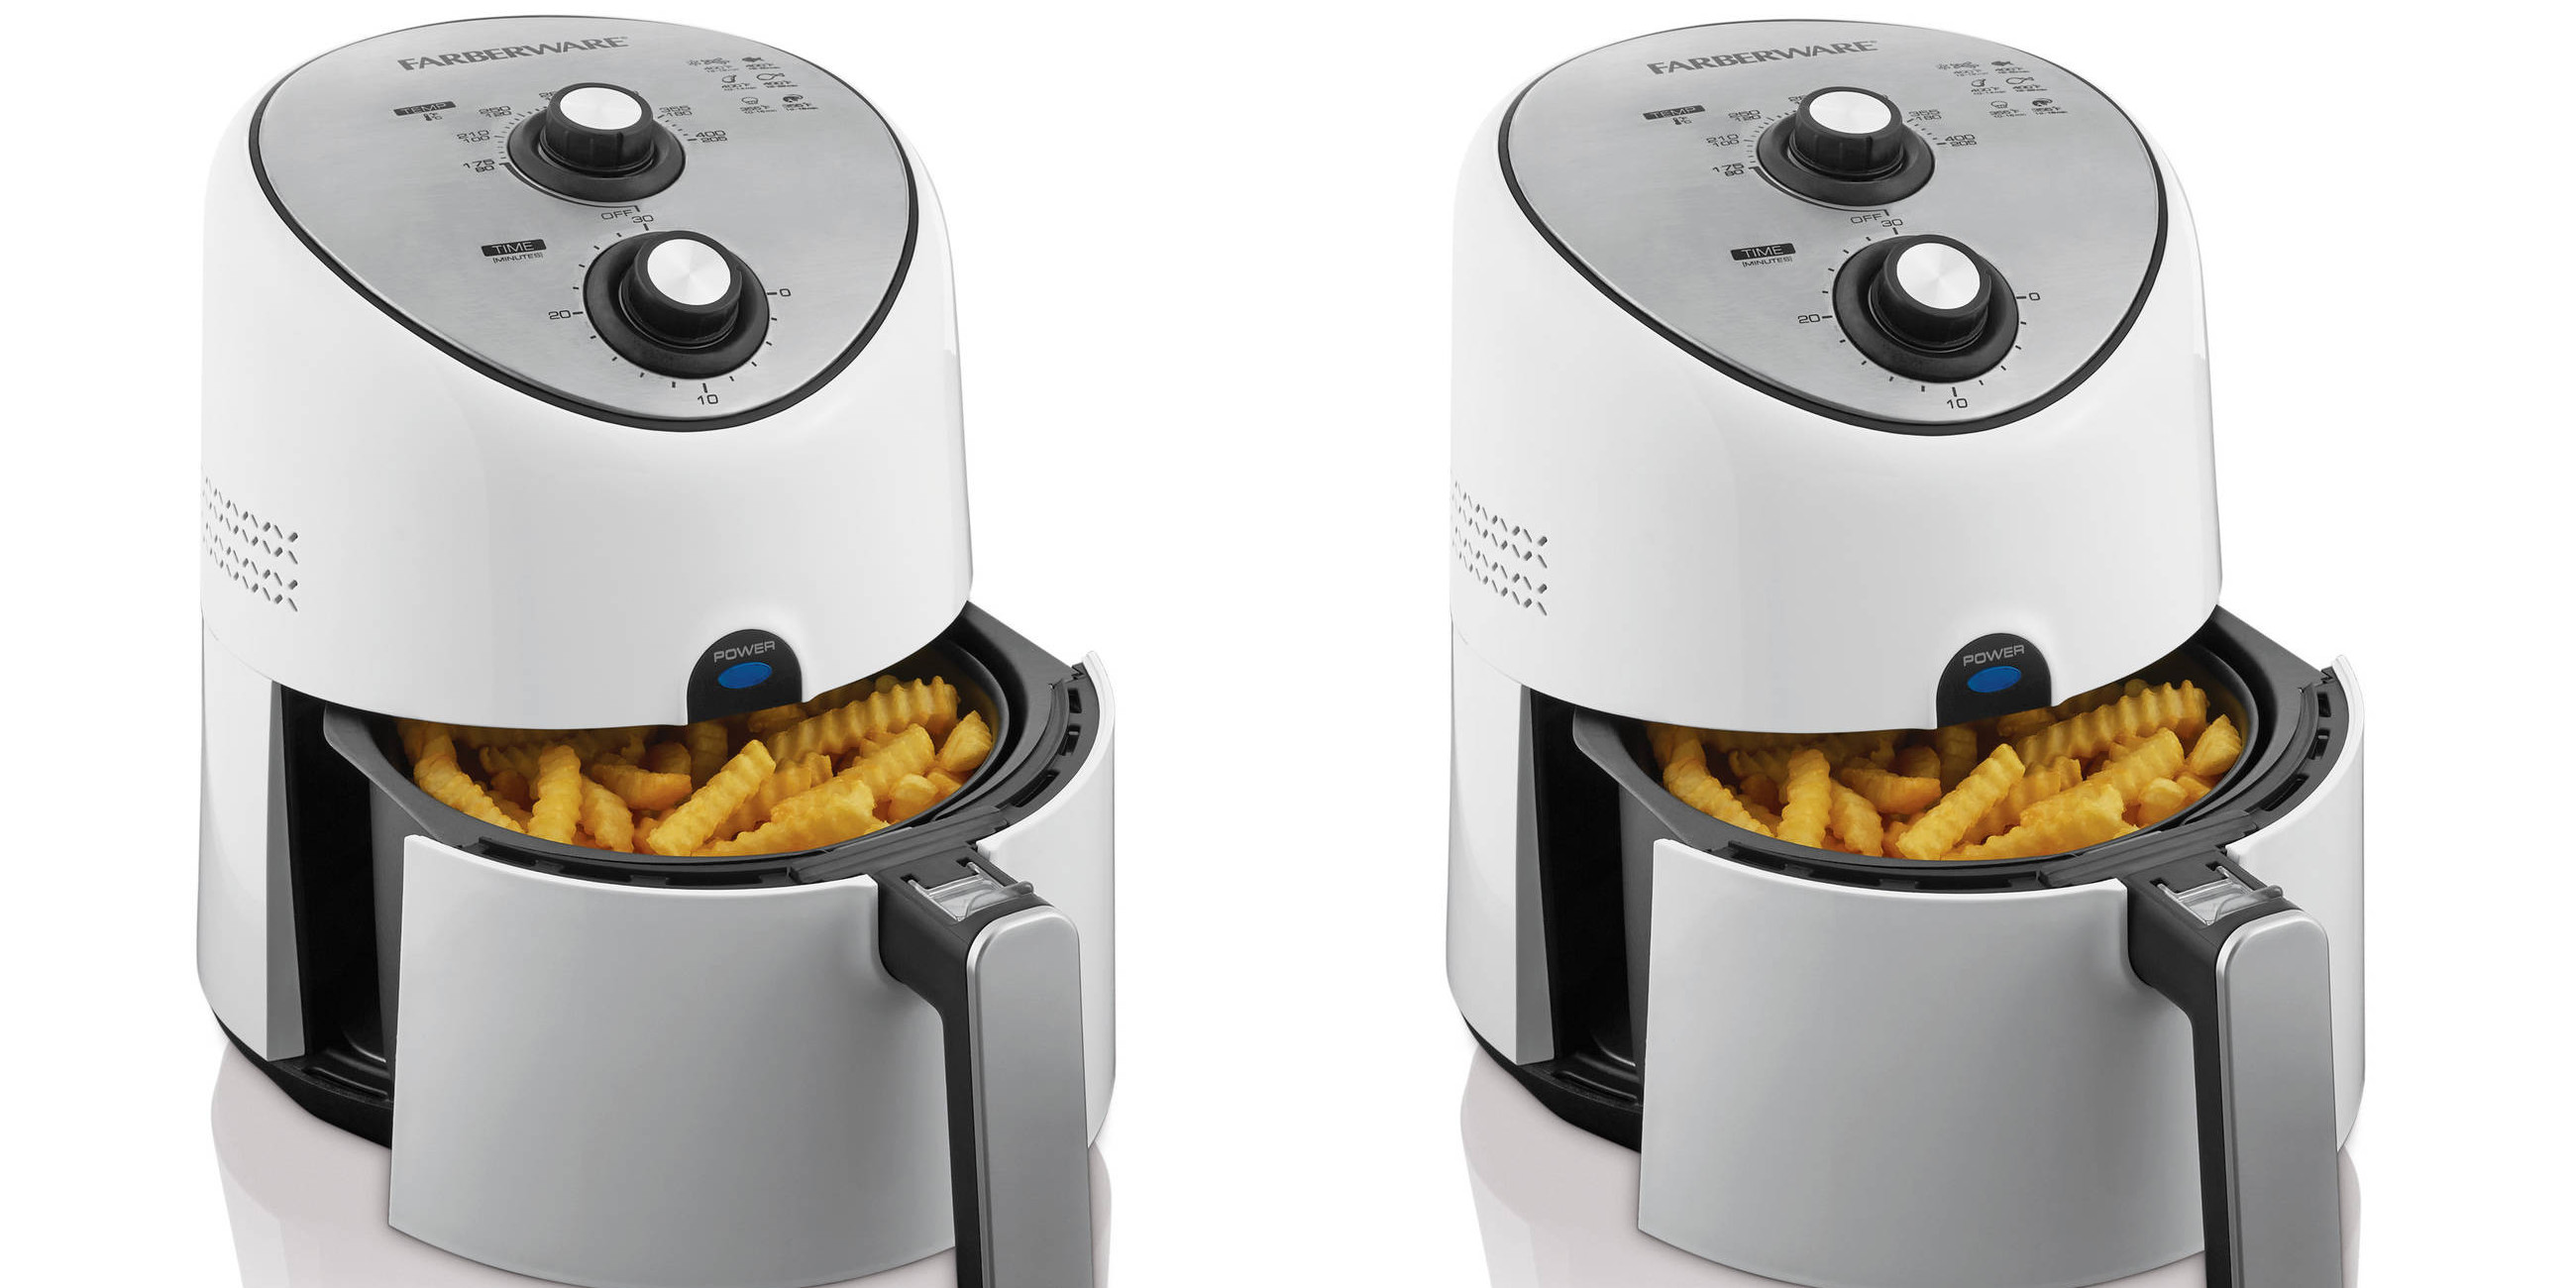 https://9to5toys.com/wp-content/uploads/sites/5/2017/01/air-fryer-01.jpg